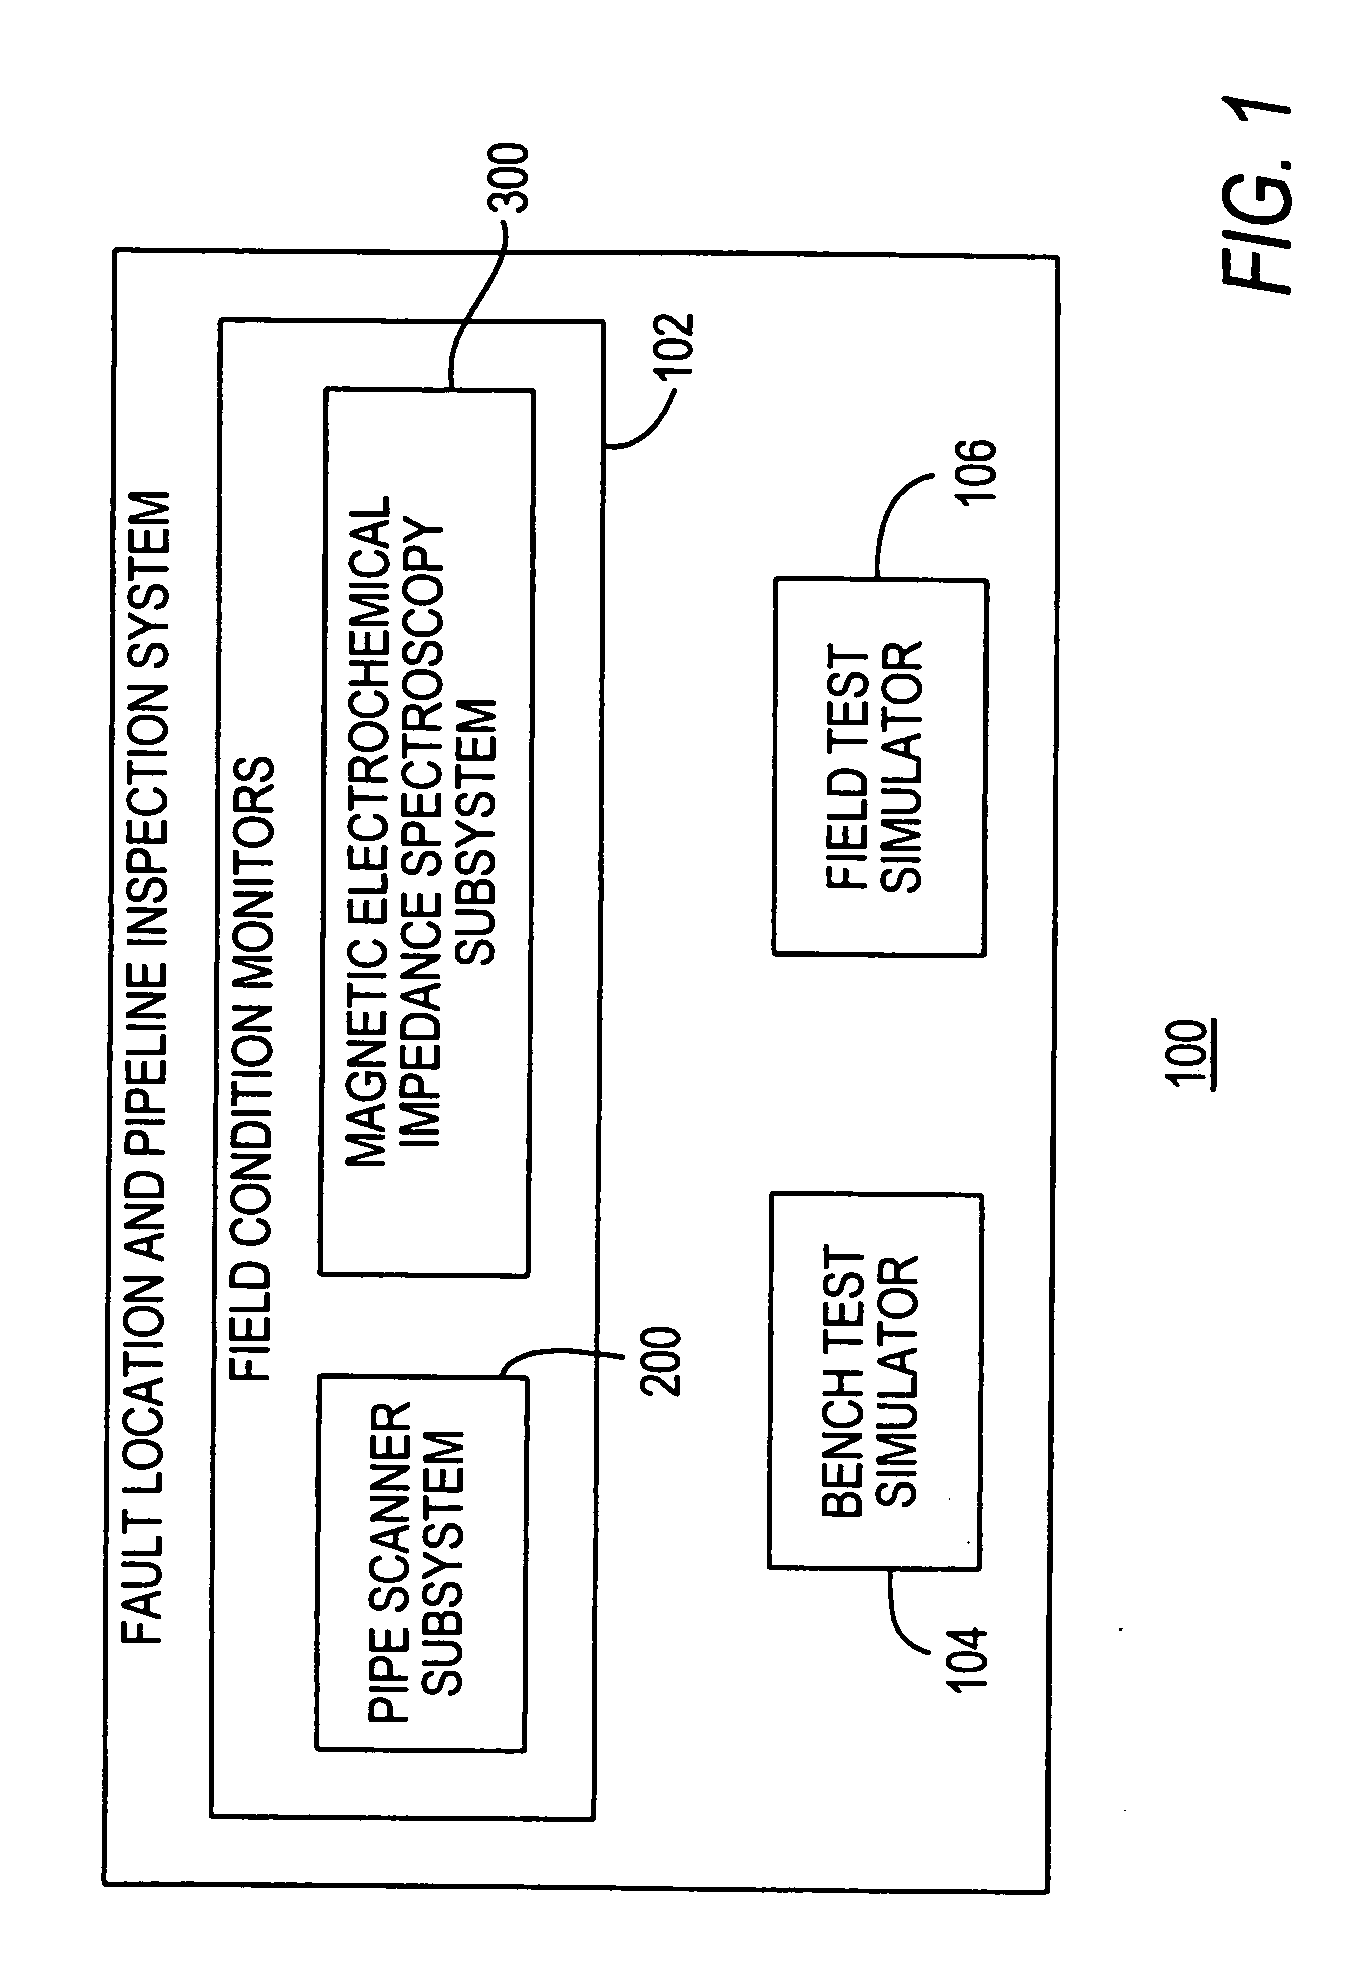 Method and apparatus for estimating the condition of a coating on an underground pipeline